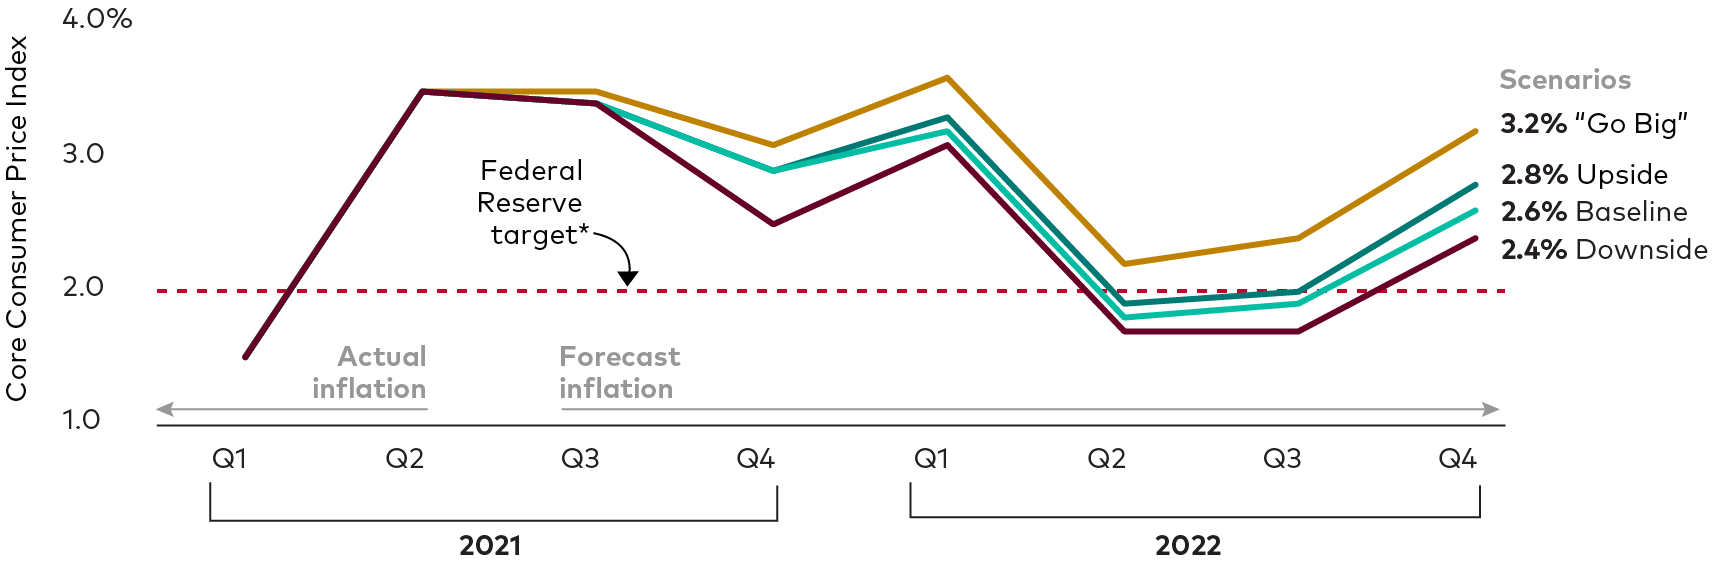 A line chart shows the actual level of the core Consumer Price Index in the first two quarters of 2021. It also shows four scenario forecasts: downside, baseline, upside, and “go big.” All four scenarios anticipate upturns in inflation from the fourth quarter of 2021 through the first quarter of 2022 and again toward the end of 2022. Only the “go big” scenario exceeds 3% in the fourth quarter of 2022, but all the scenarios at that point are above the Federal Reserve’s average inflation target of 2%.